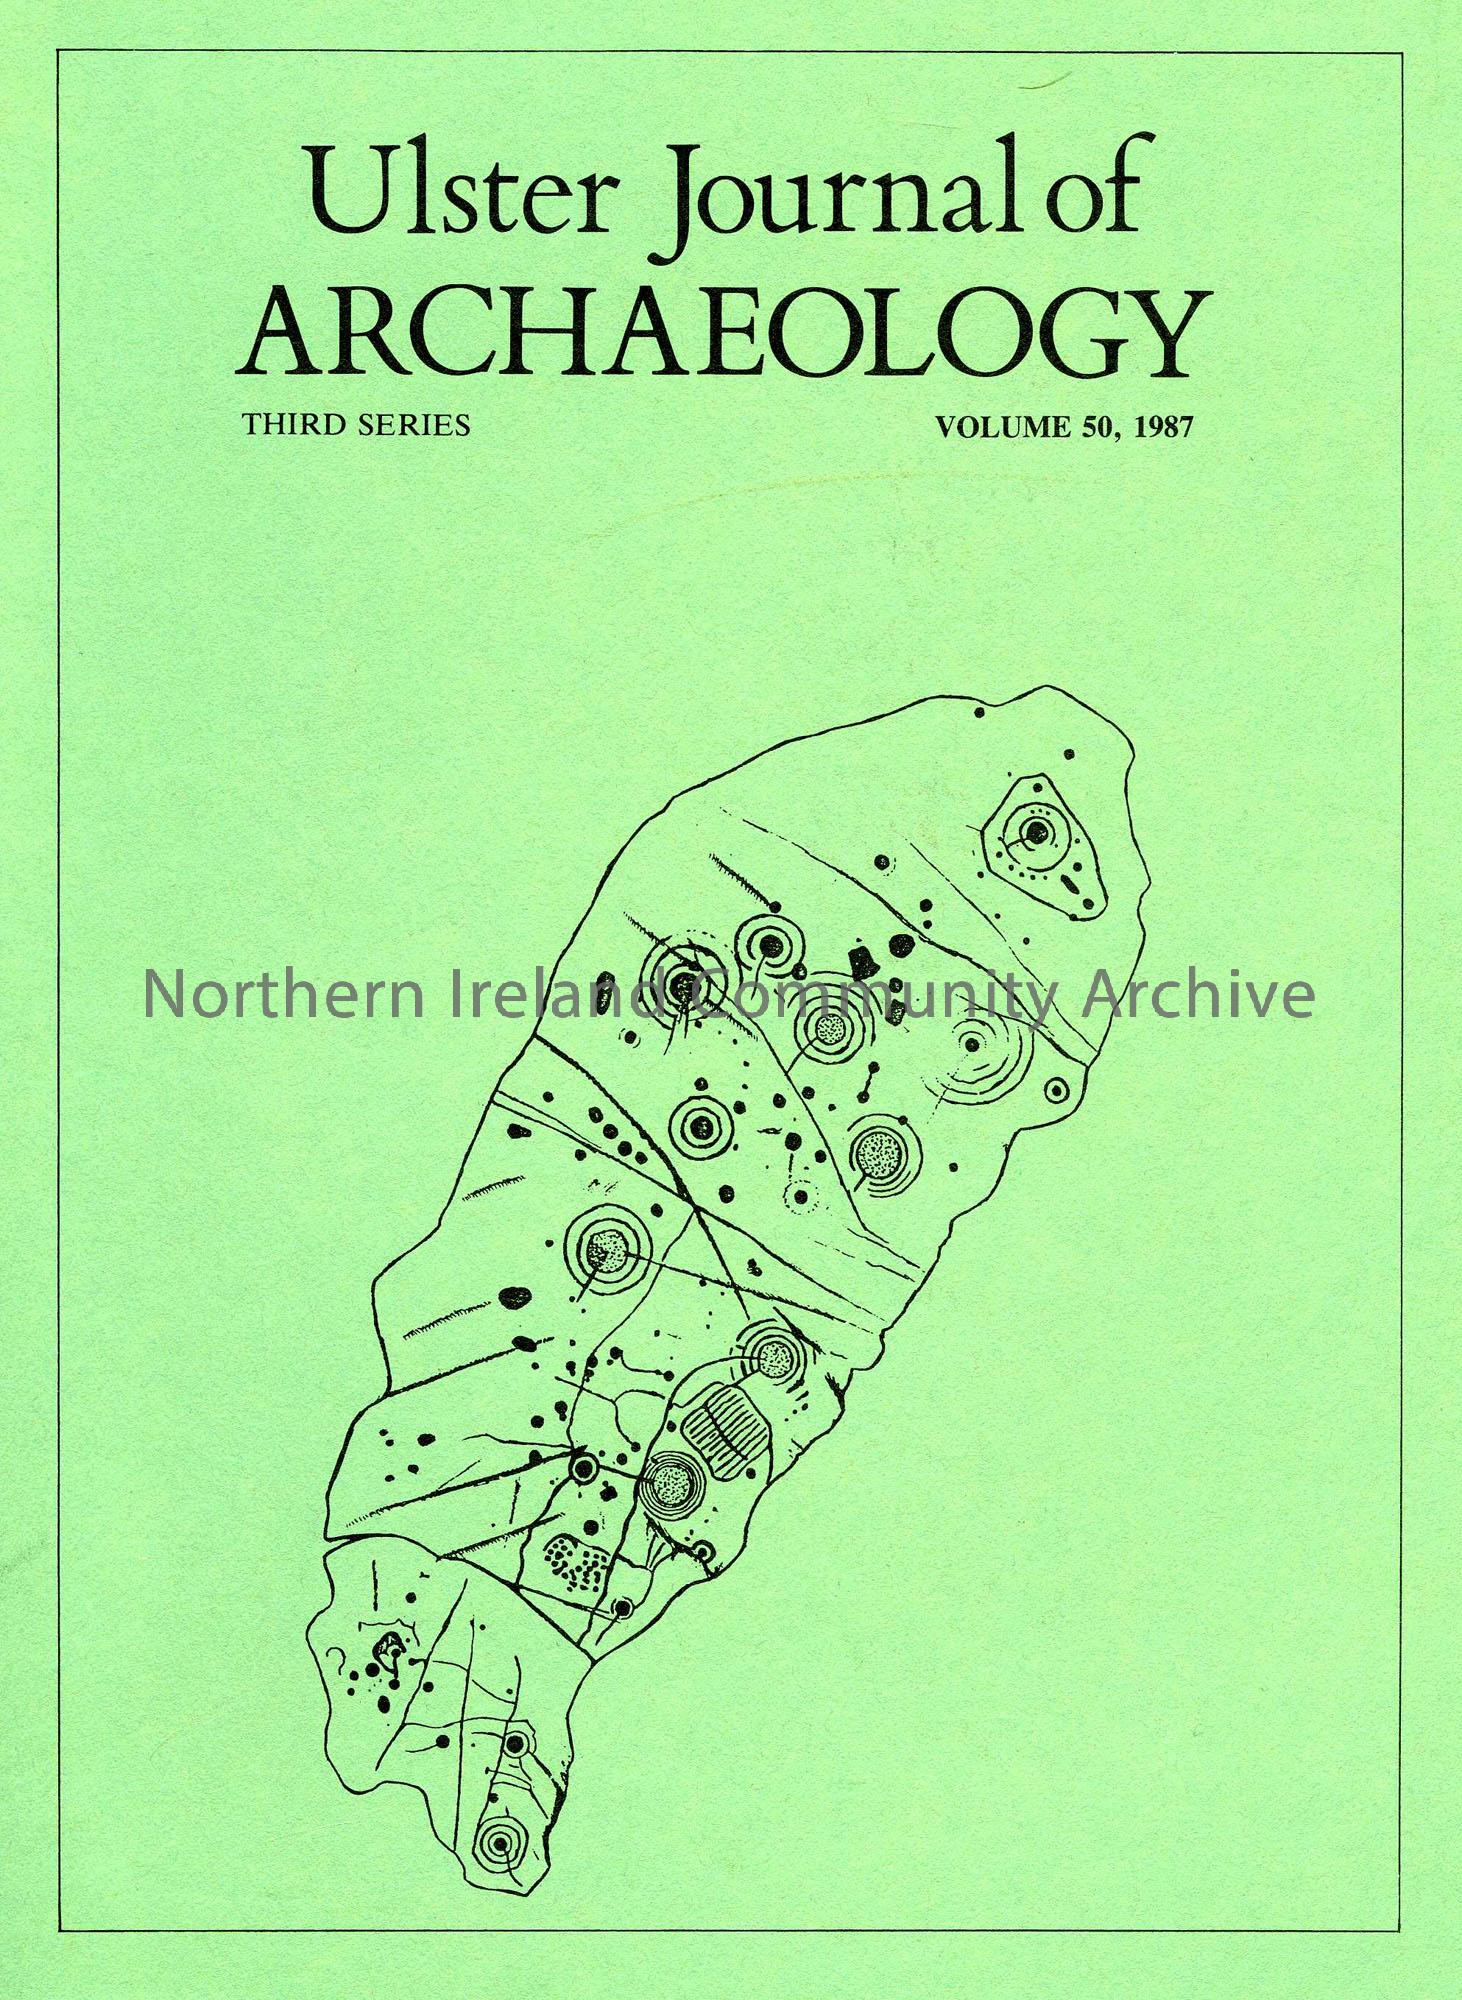 book titled, Ulster Journal of Archaeology. Third Series Volume 50, 1987 (4053)